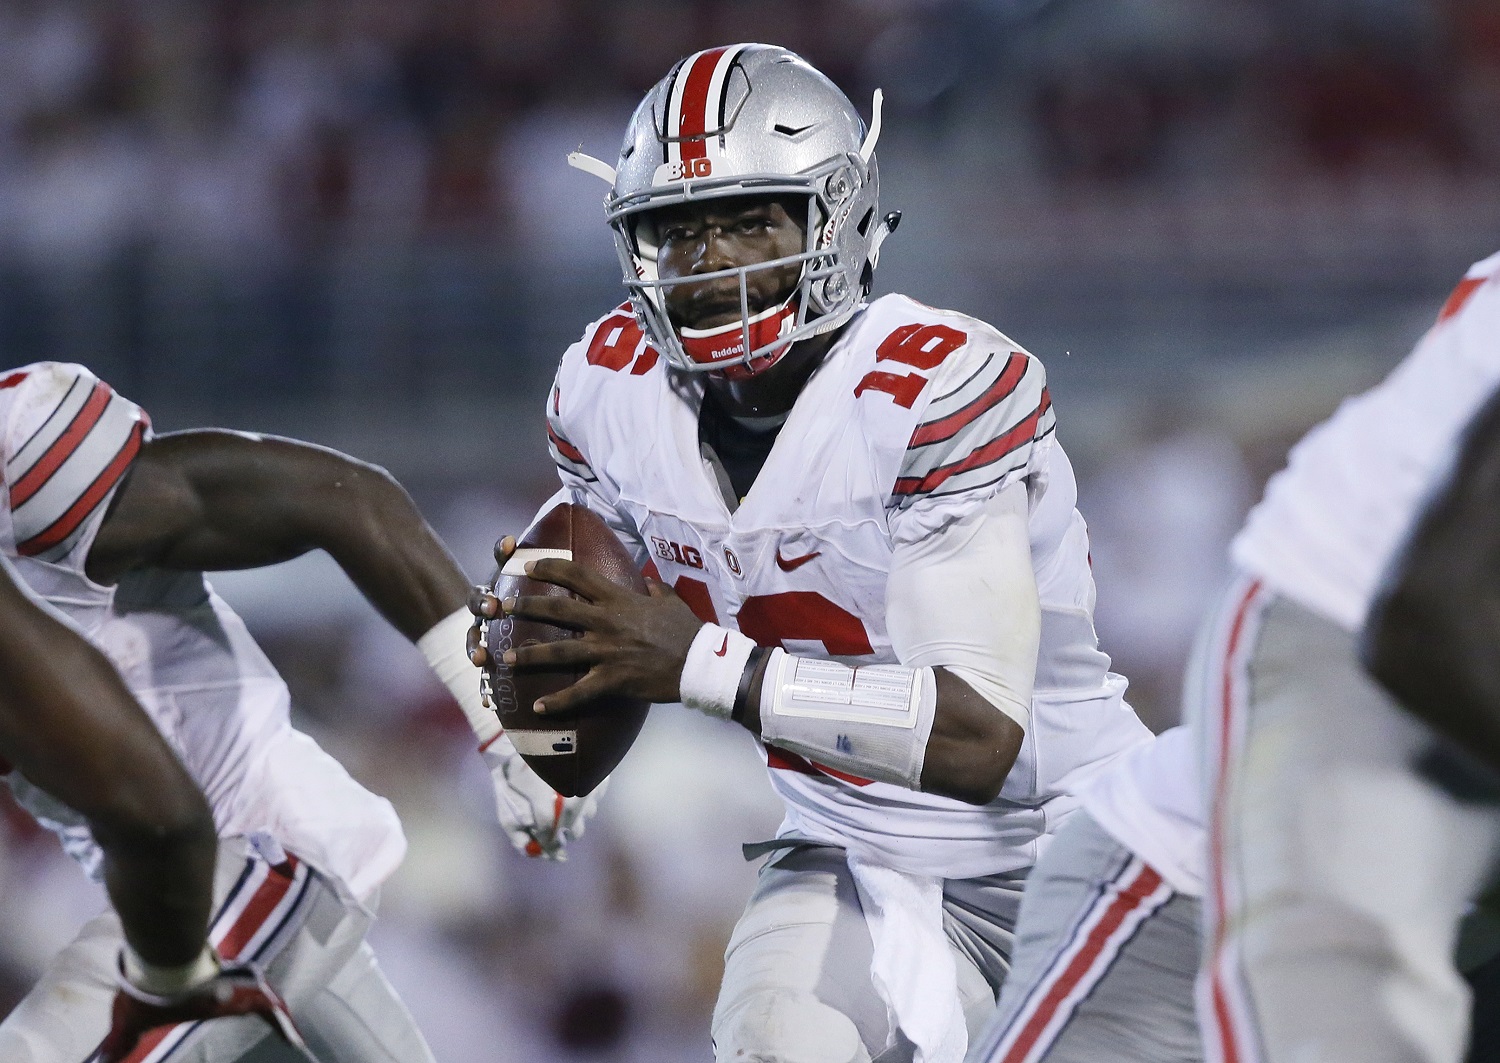 FILE - In this Saturday, Sept. 17, 2016, file photo, Ohio State quarterback J.T. Barrett (16) scrambles during the fourth quarter of an NCAA college football game against Oklahoma in Norman, Okla. After blowing away opponents in the first four games, Ohio State’s plummet back to earth has included offensive woes, an upset by unranked Penn State and a narrow escape against three-touchdown underdog Northwestern at home. Coach Urban Meyer has taken to calling the team a “project” still in the works, as if to reset expectations that soared in the first month of the season when quarterback Barrett was breaking school passing records and new ball-hawking stars were emerging on the defense. (AP Photo/Sue Ogrocki, File)